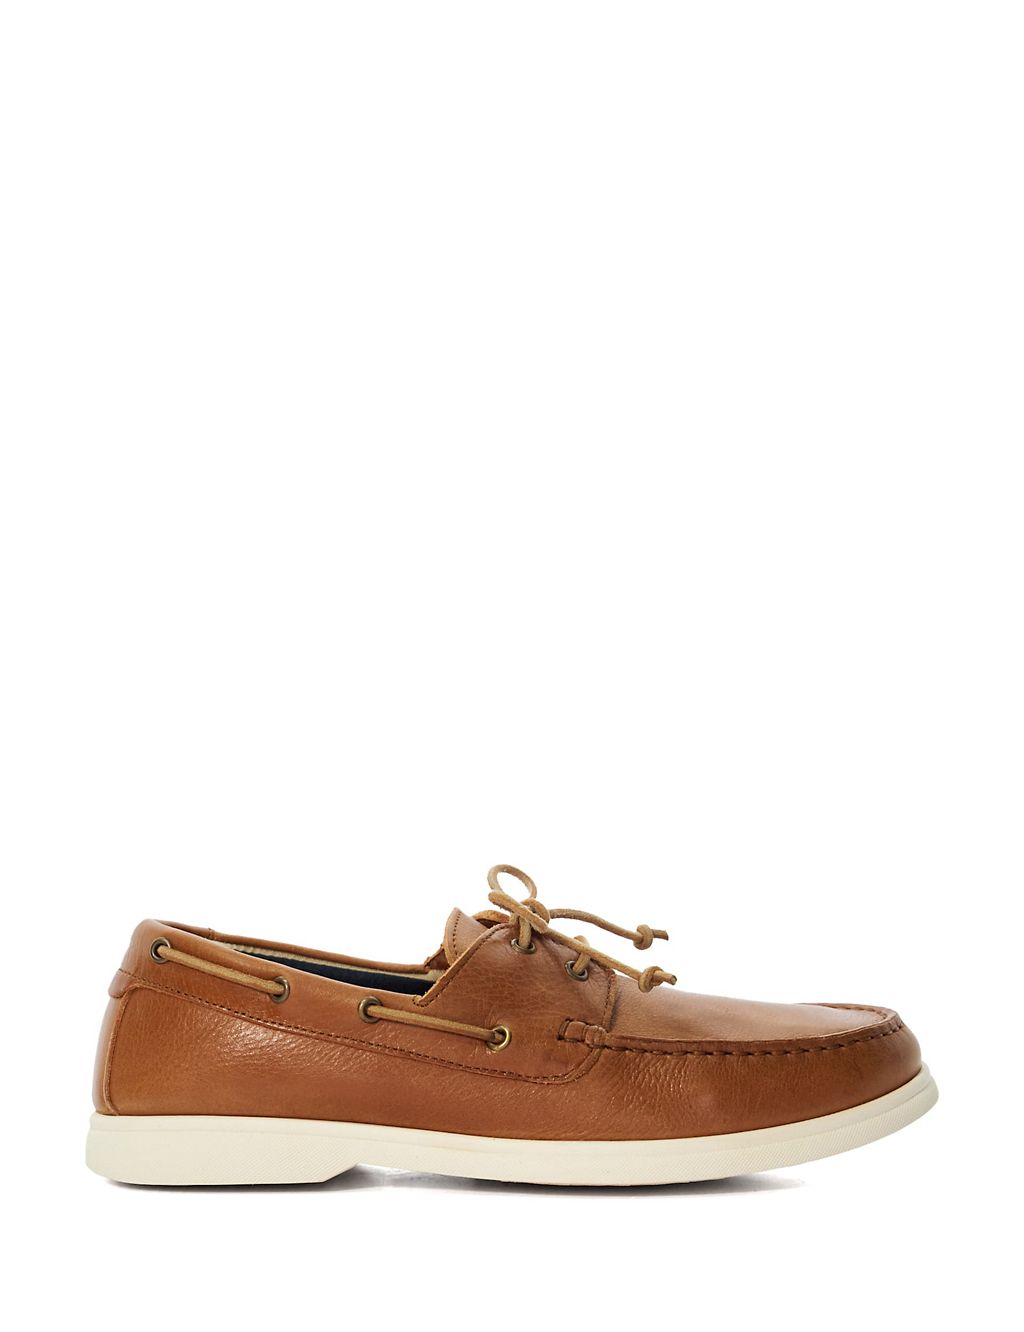 Leather Boat Shoes 3 of 5